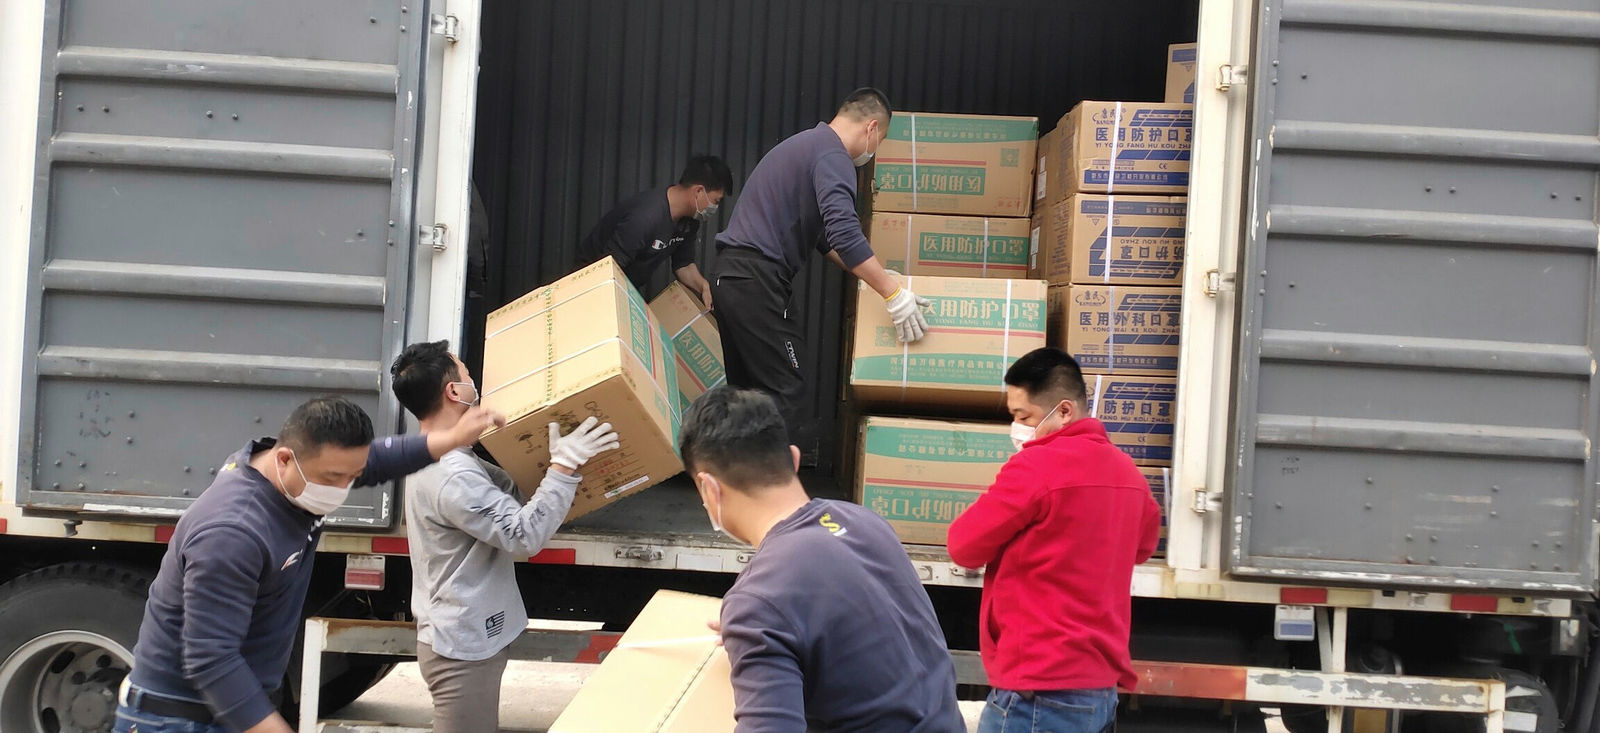 Volkswagen Group supports doctors and hospitals with major donation of medical supplies from China